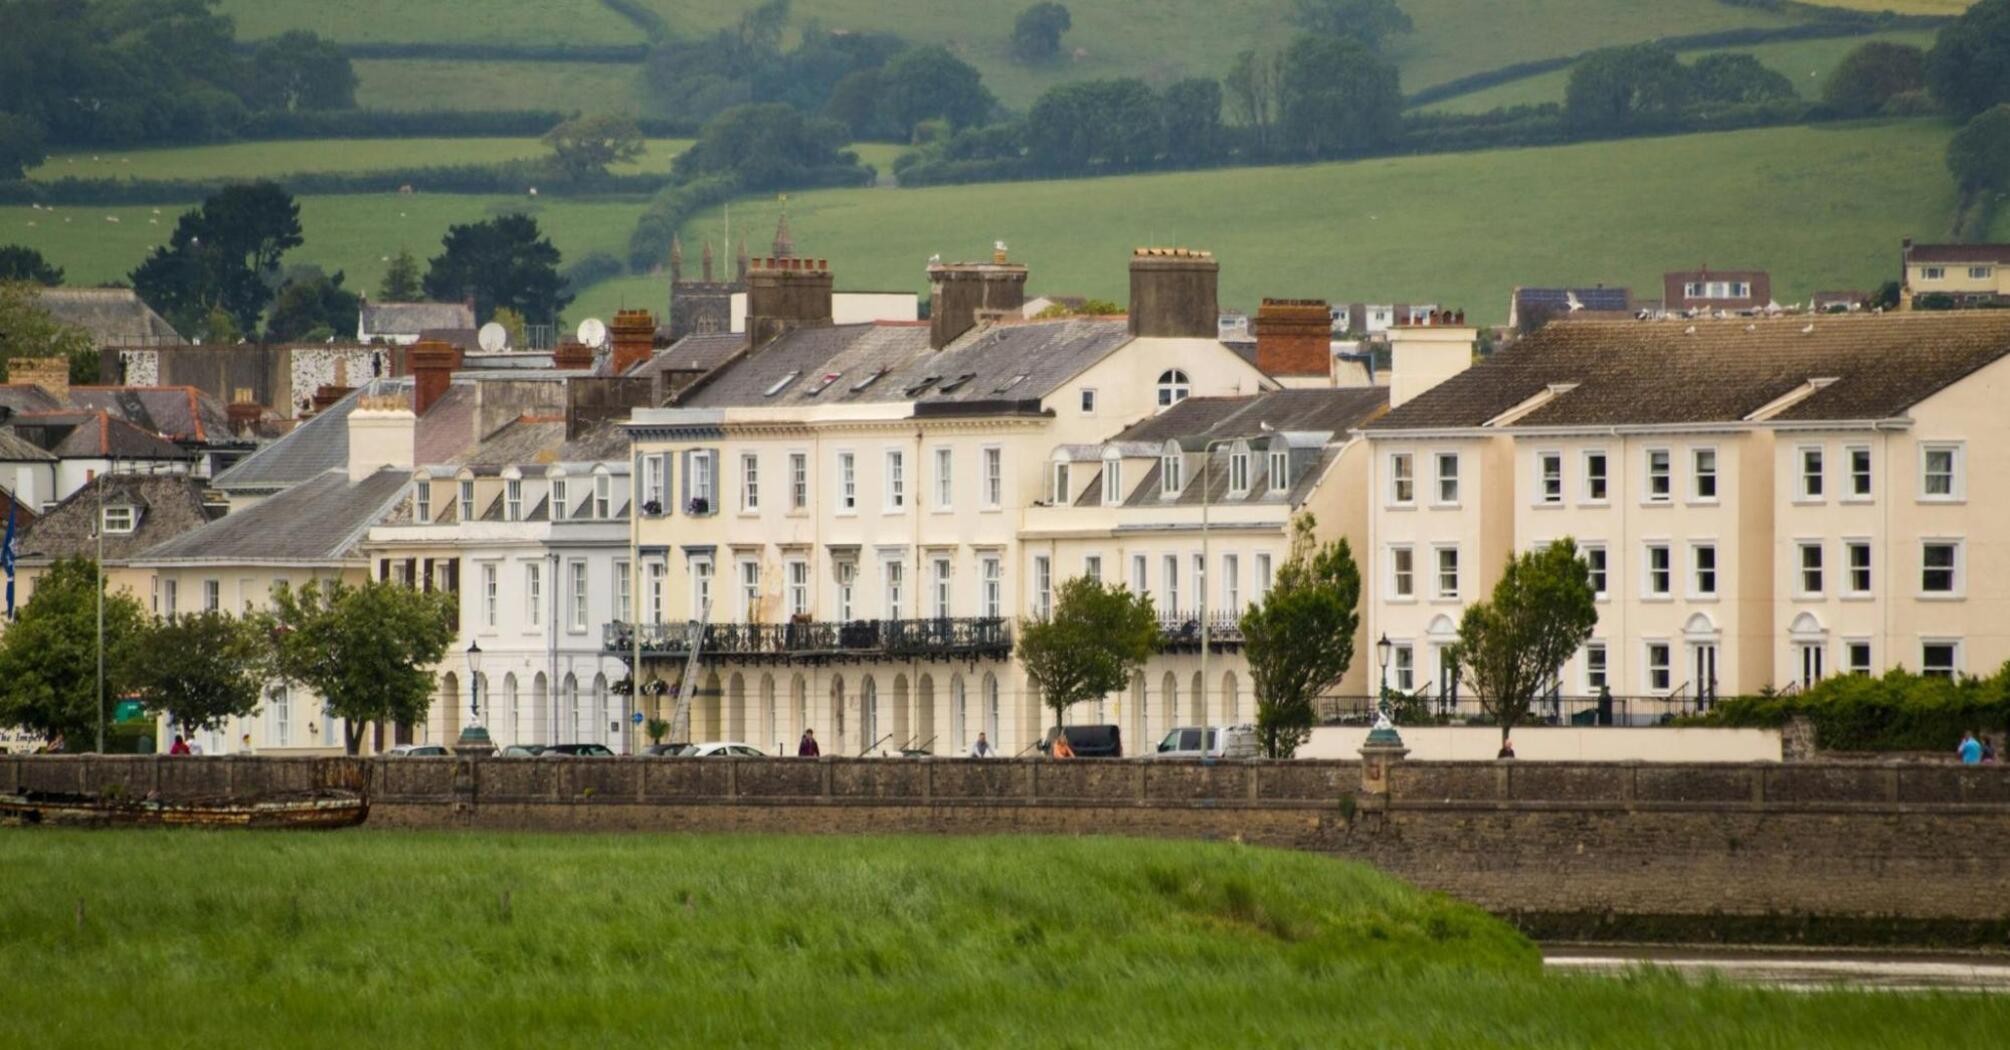 A row of white and brown buildings in Barnstaple